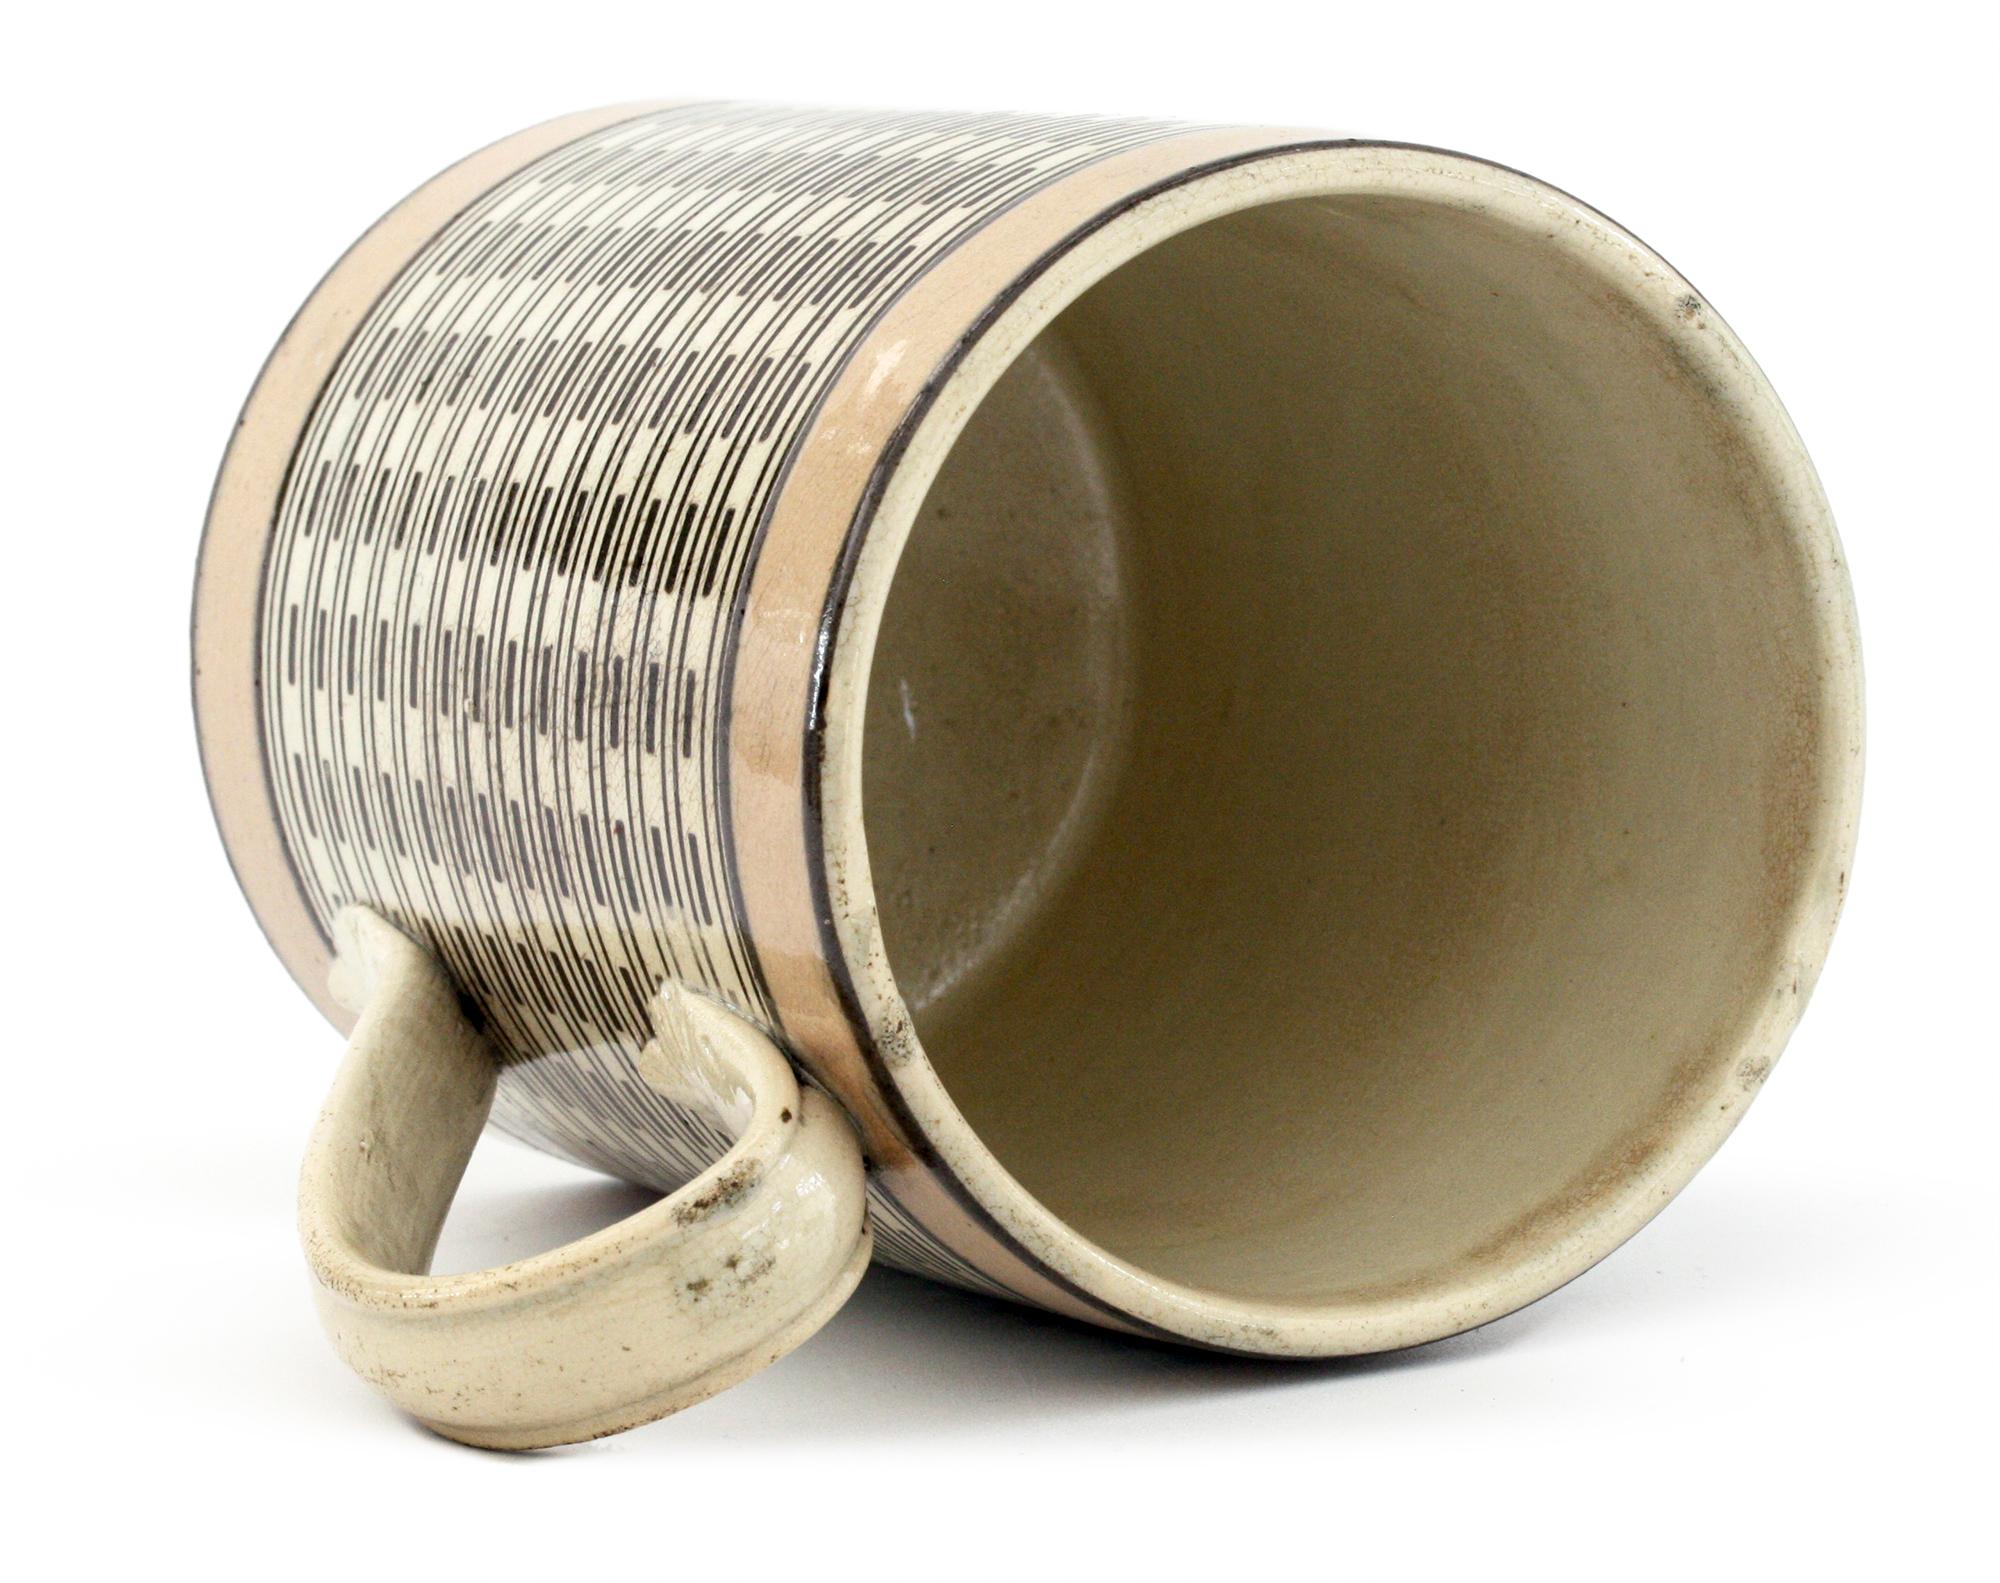 A rare and unusual antique mocha ware pottery mug the cream colored body decorated with black slip banding in a line and dash pattern set between two blush pink bands applied around the top and lower edges of the body. The mug has an ear shaped